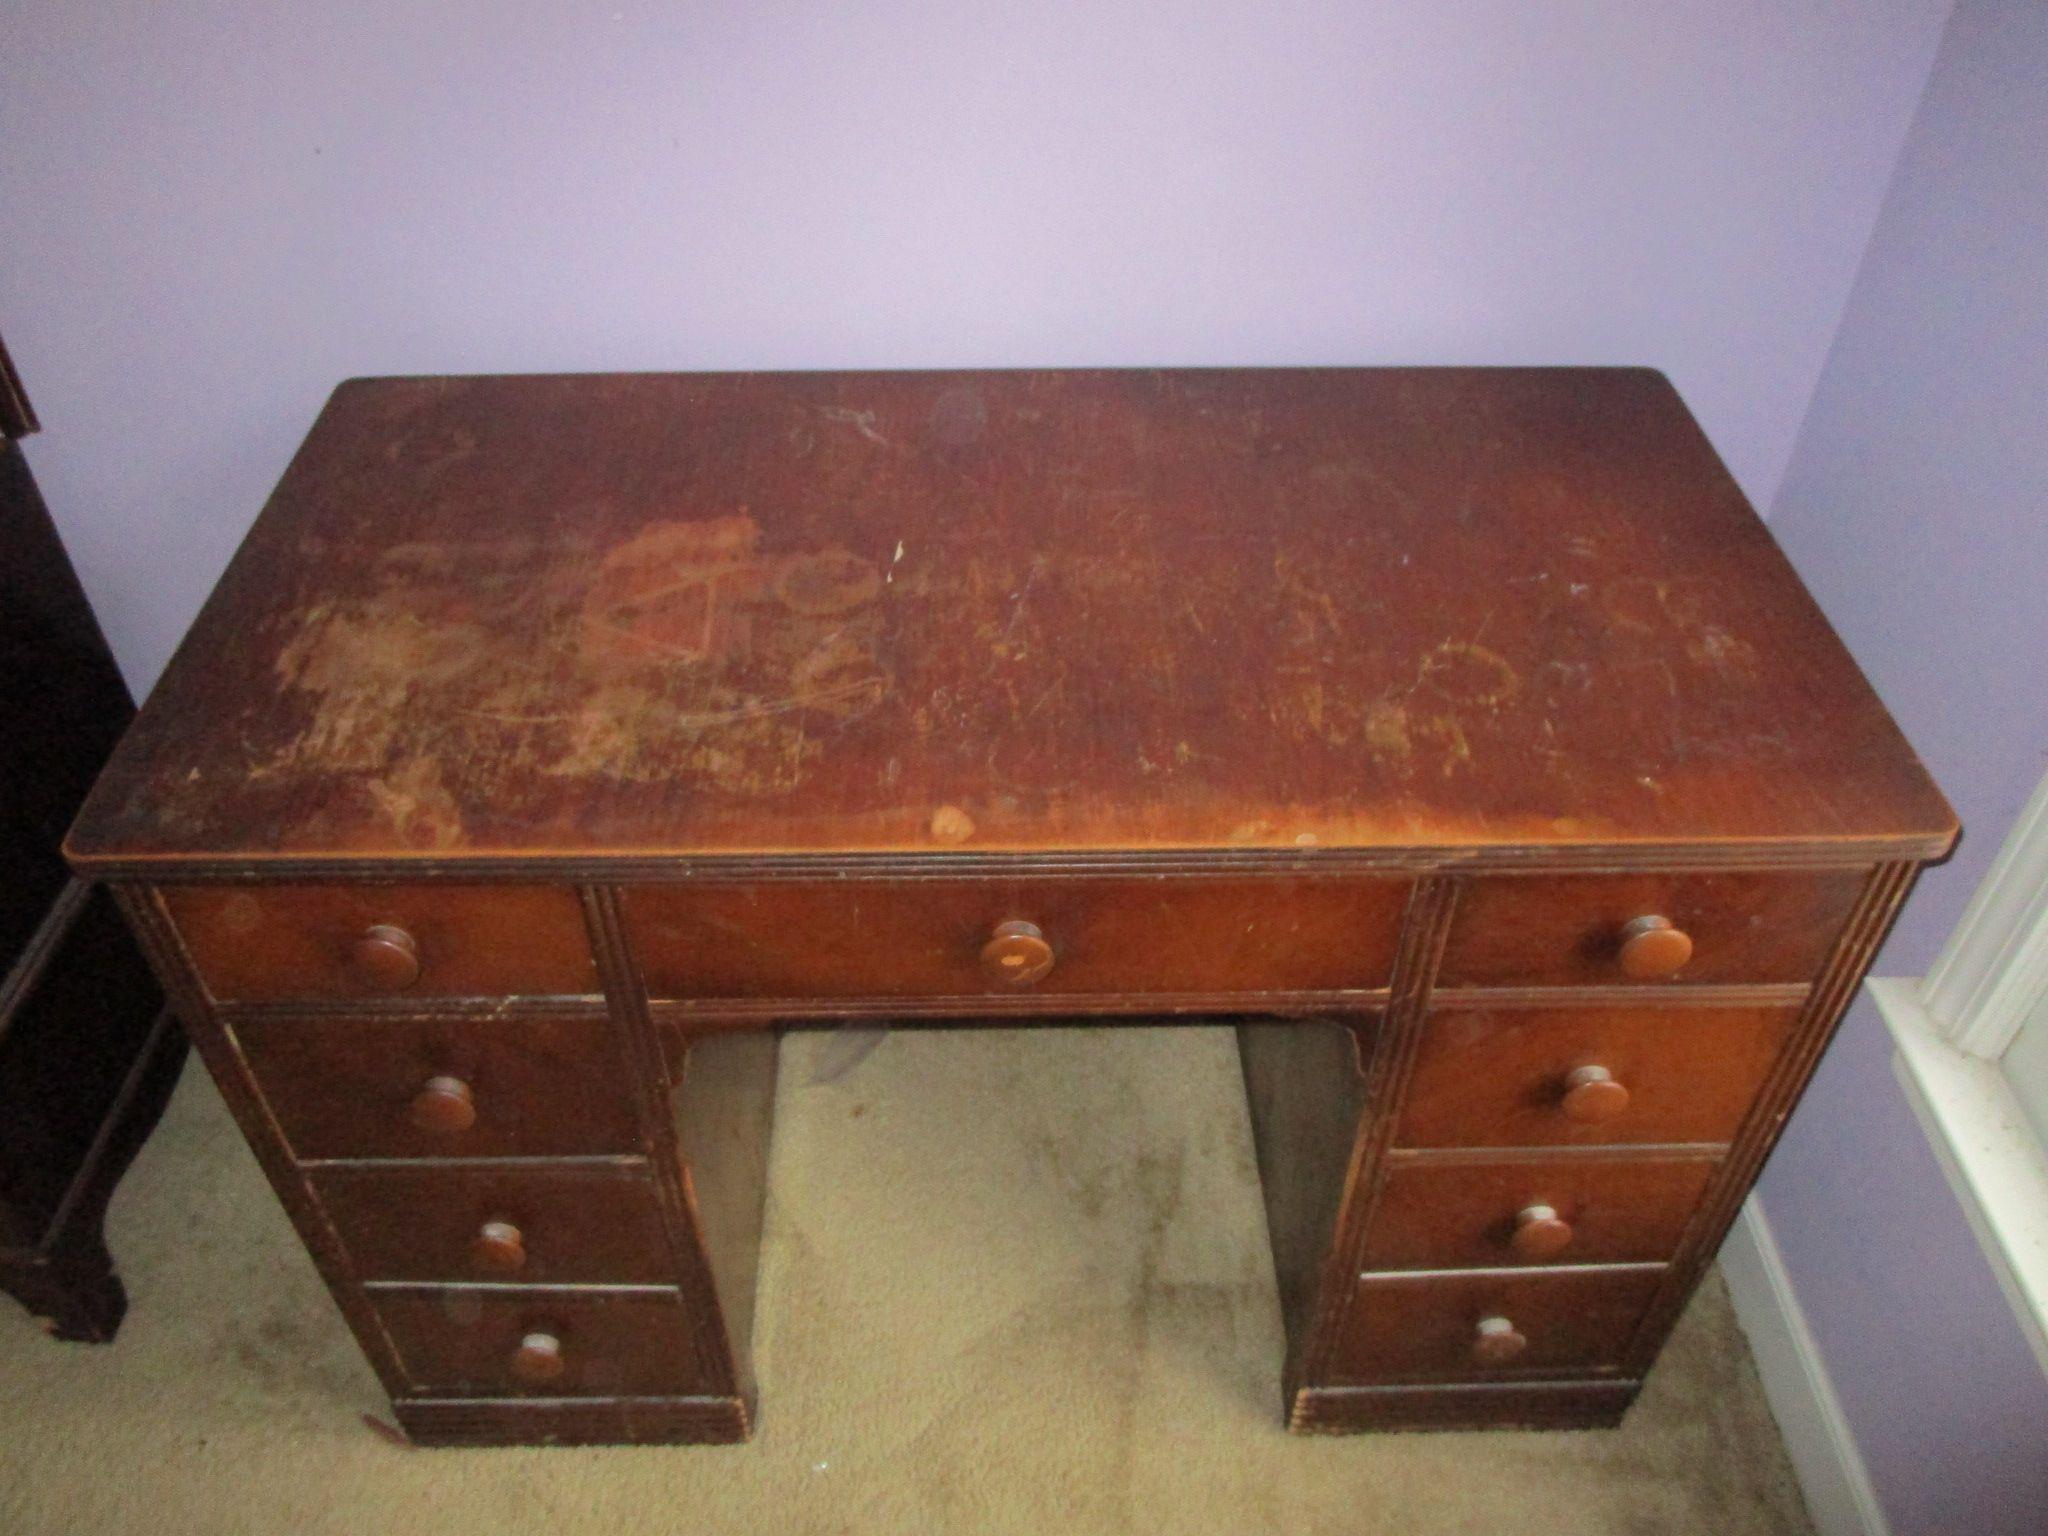 9 Drawer Wooden Kneehole Desk - shows wear - paint project or refinish